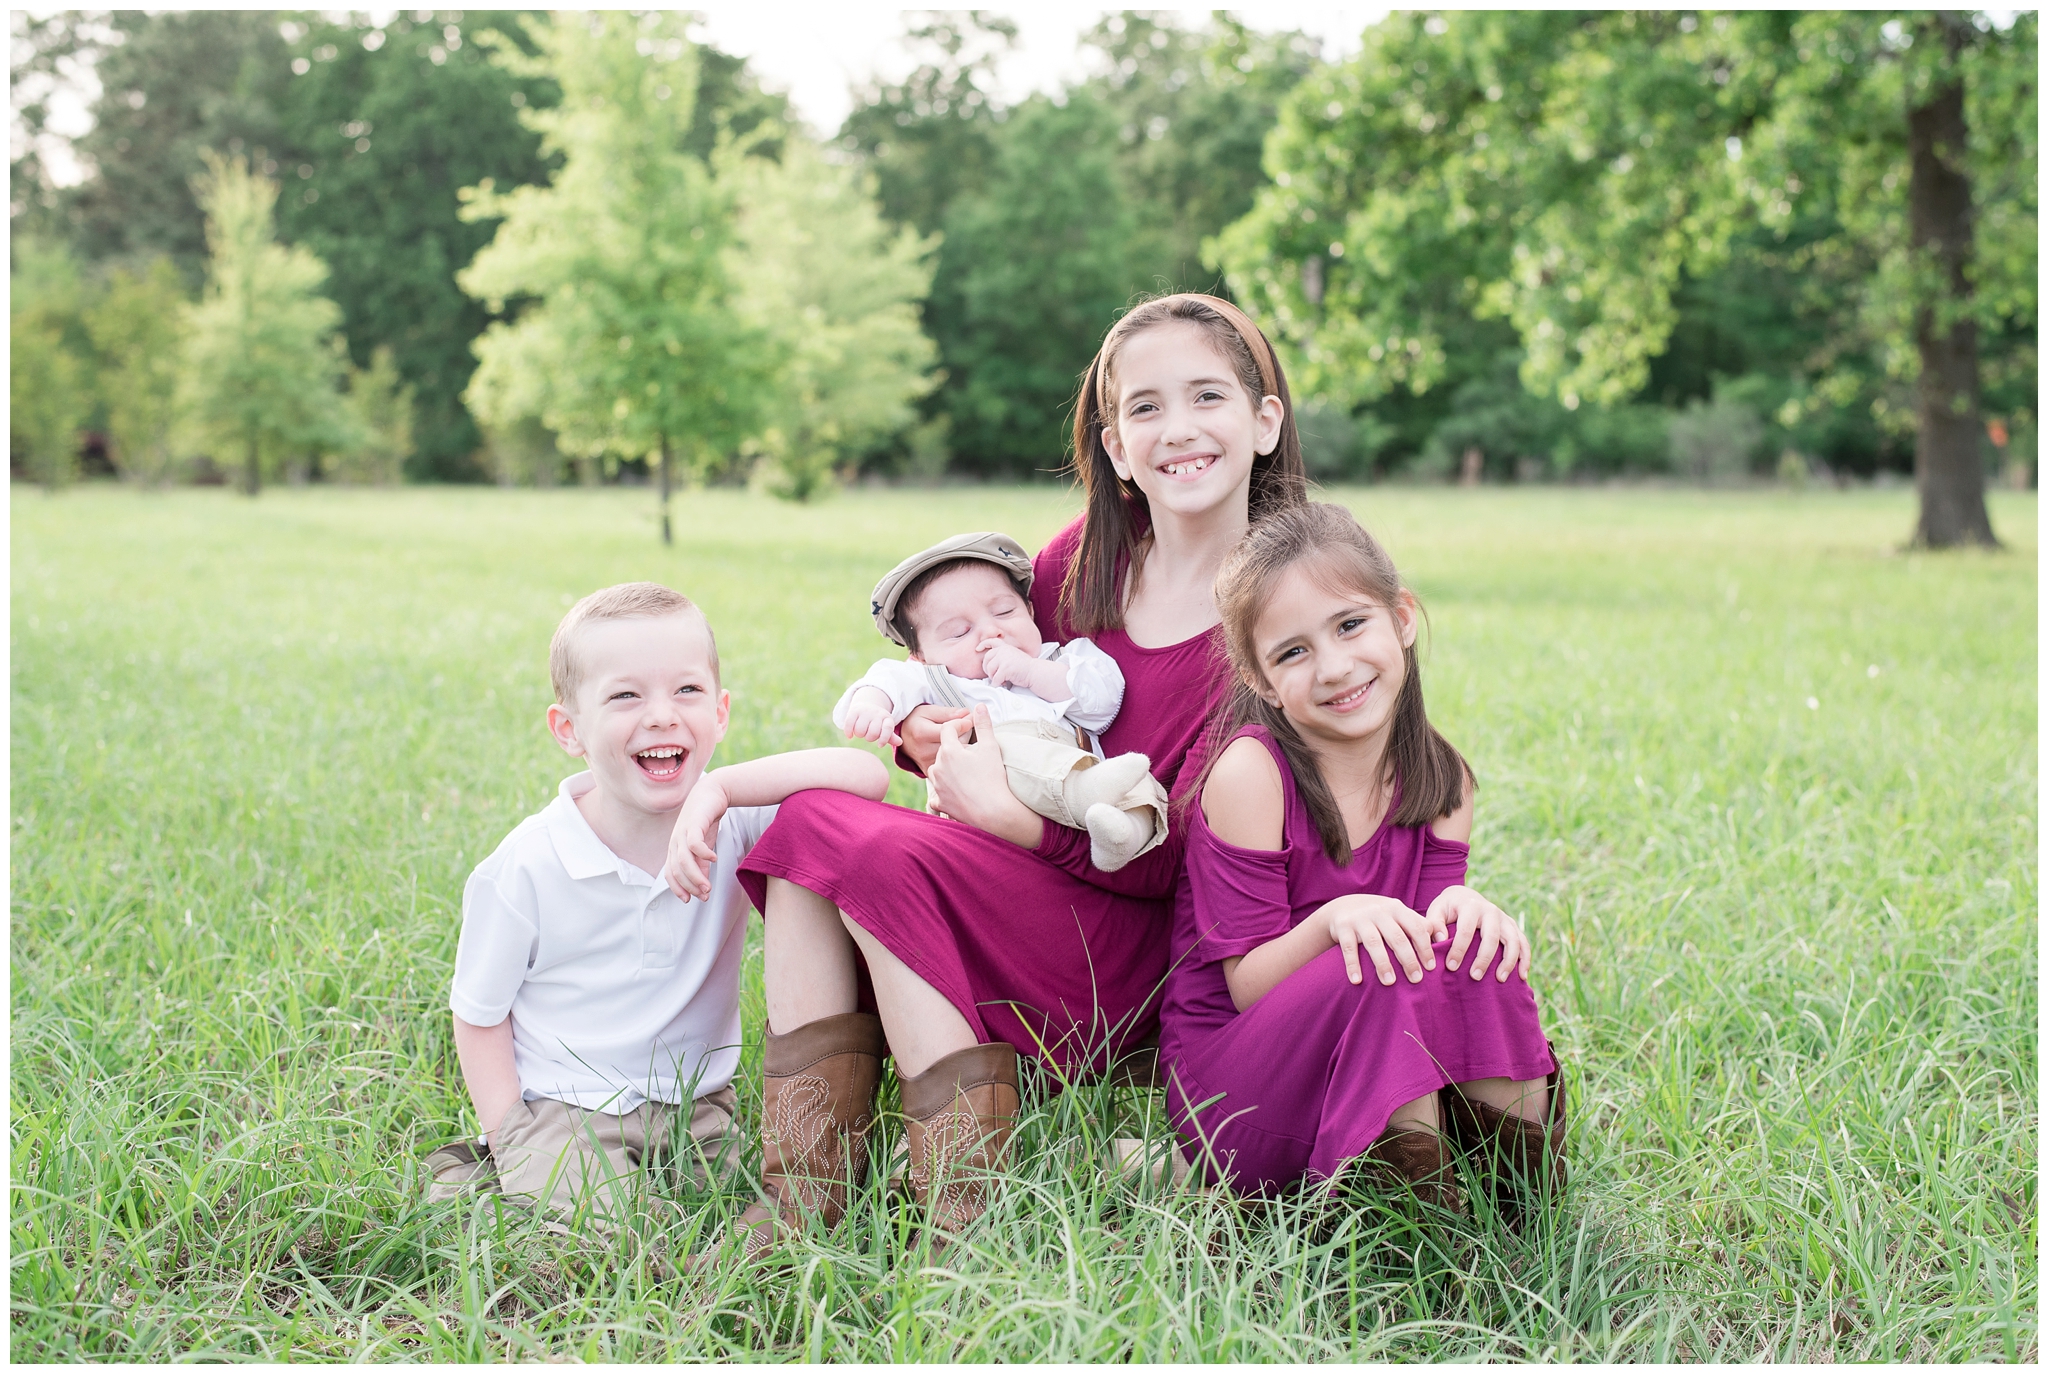 Kingwood family photographer portrait session with four cousins ages 3 months to 8 years old